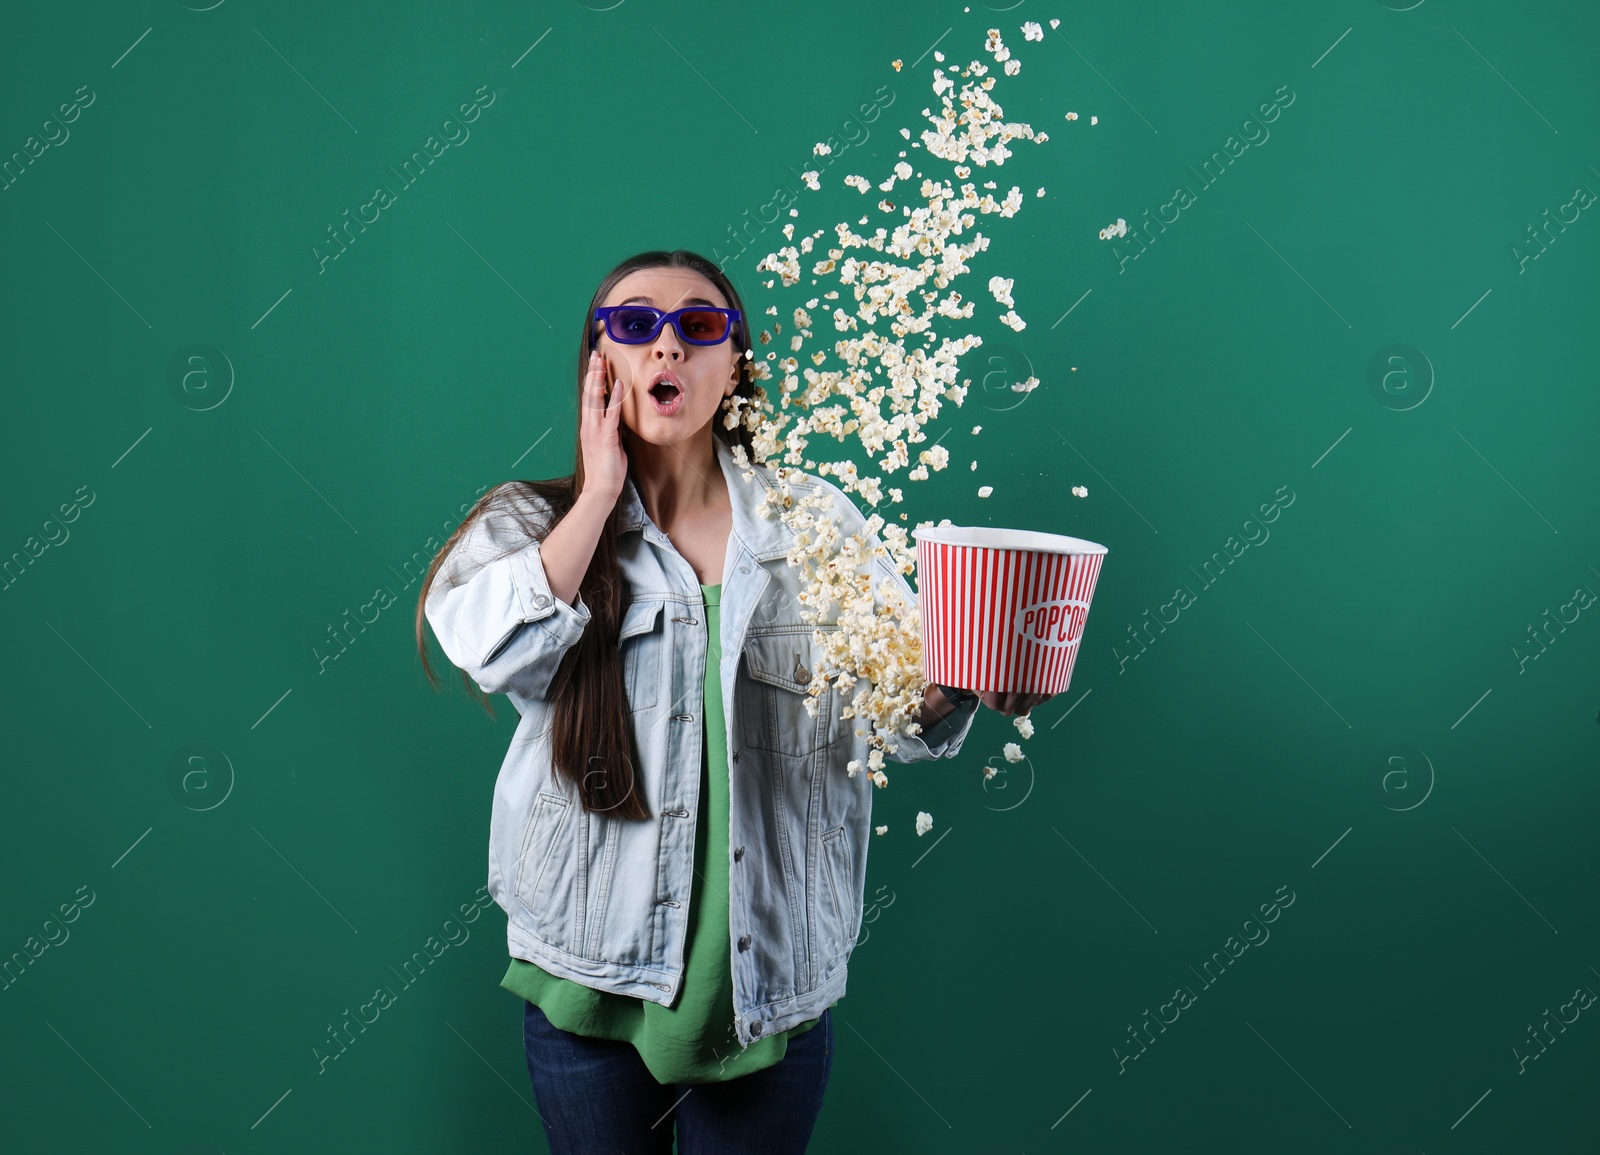 Photo of Emotional young woman with 3D glasses throwing popcorn on color background